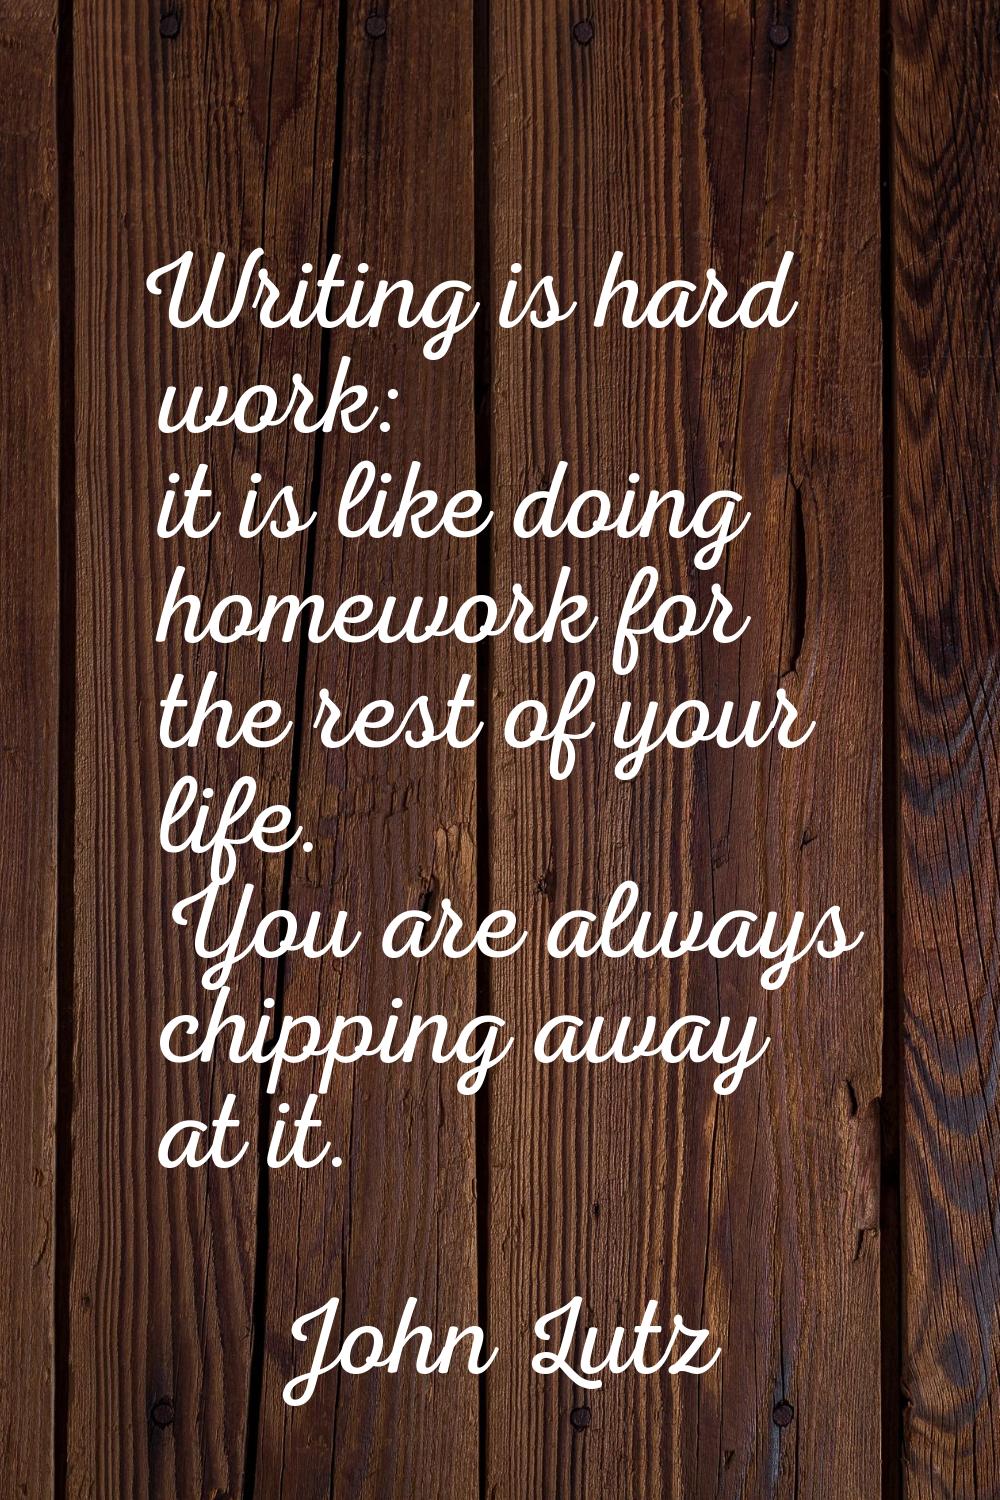 Writing is hard work: it is like doing homework for the rest of your life. You are always chipping 